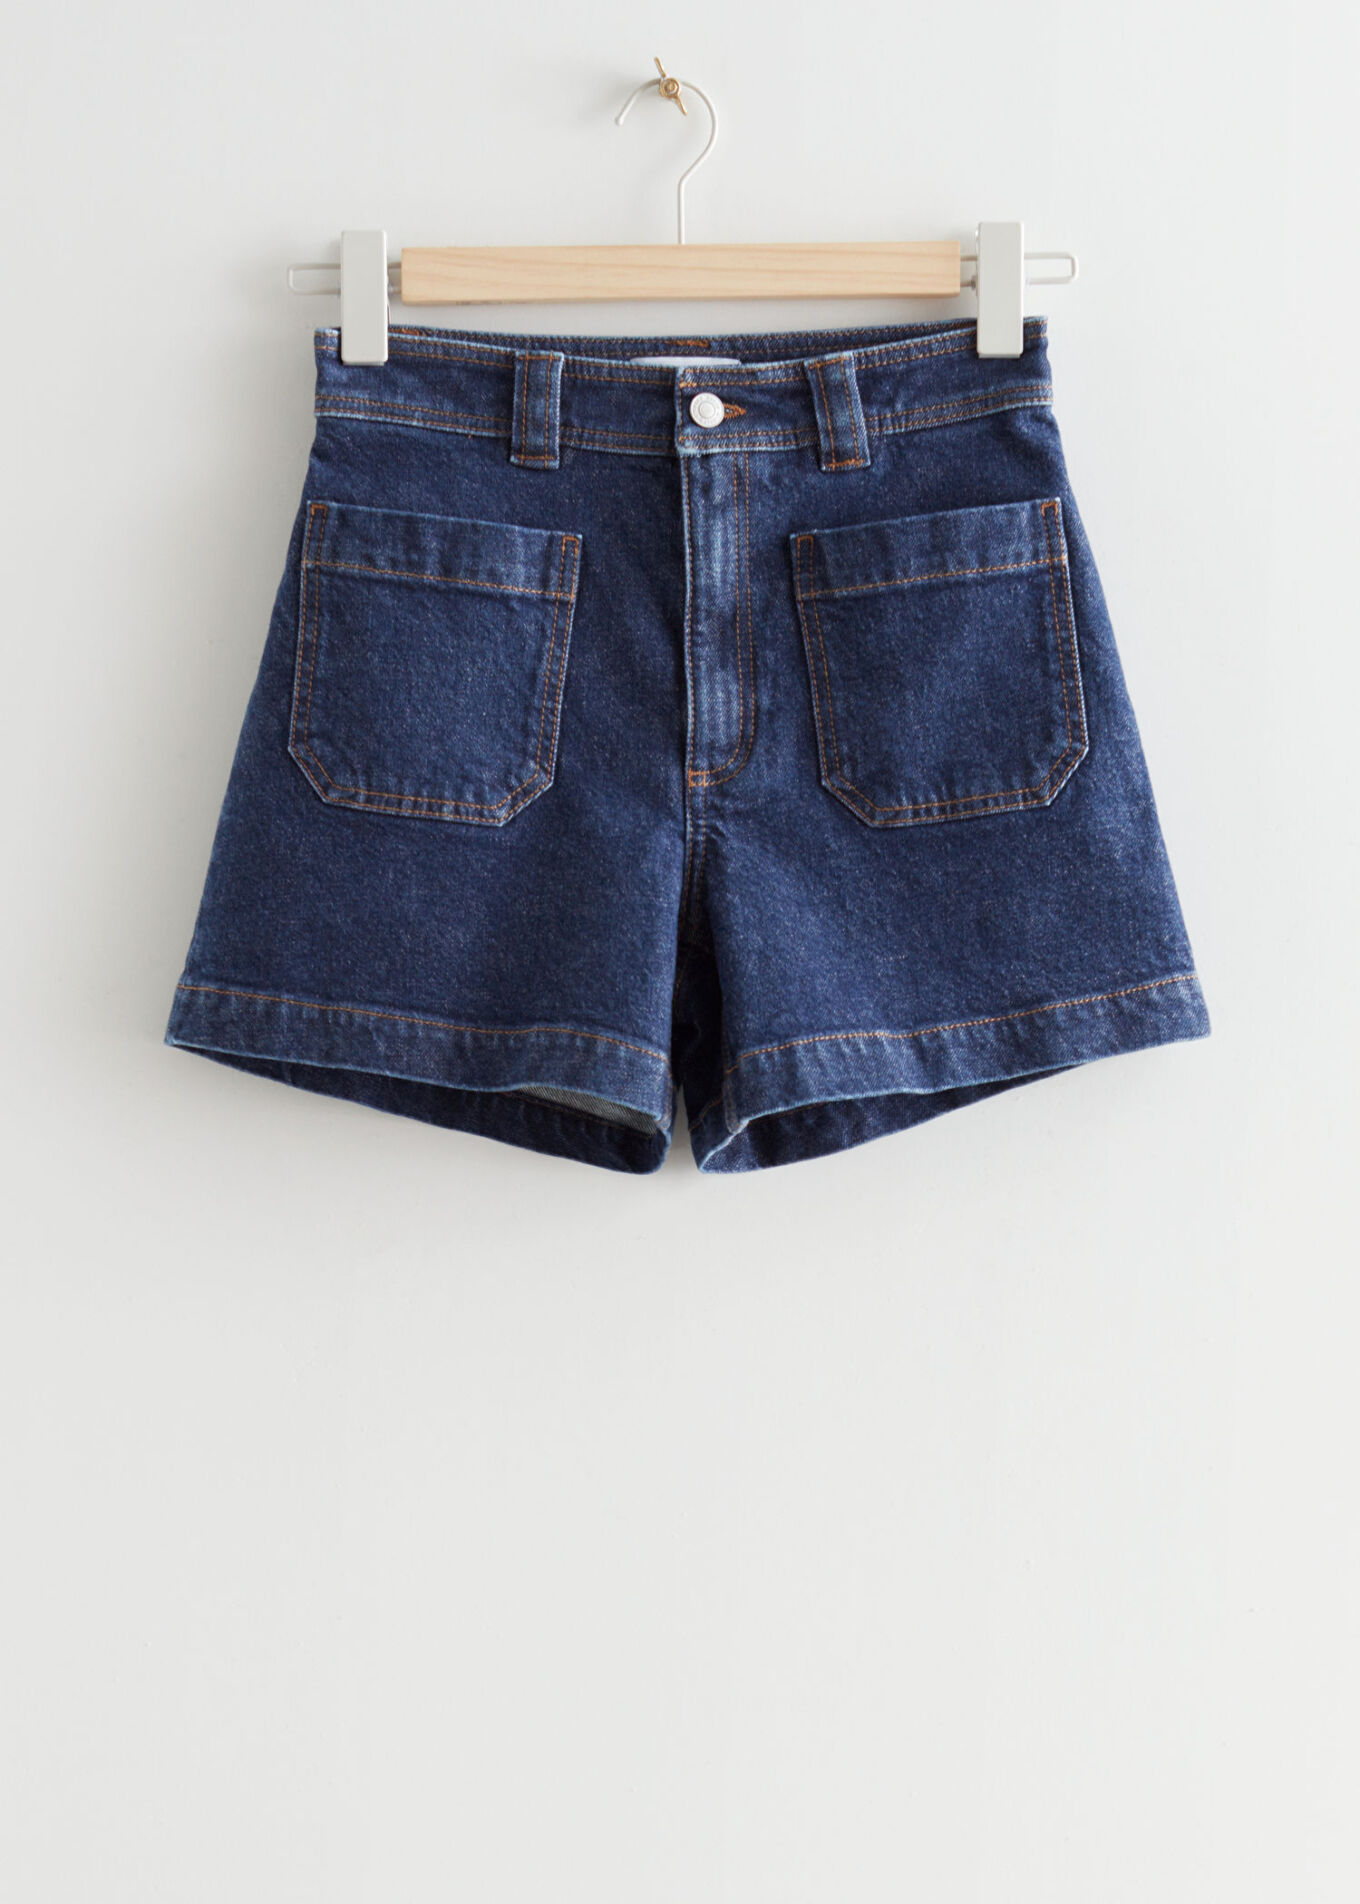 Jeansshorts, 590 kr, & Other Stories